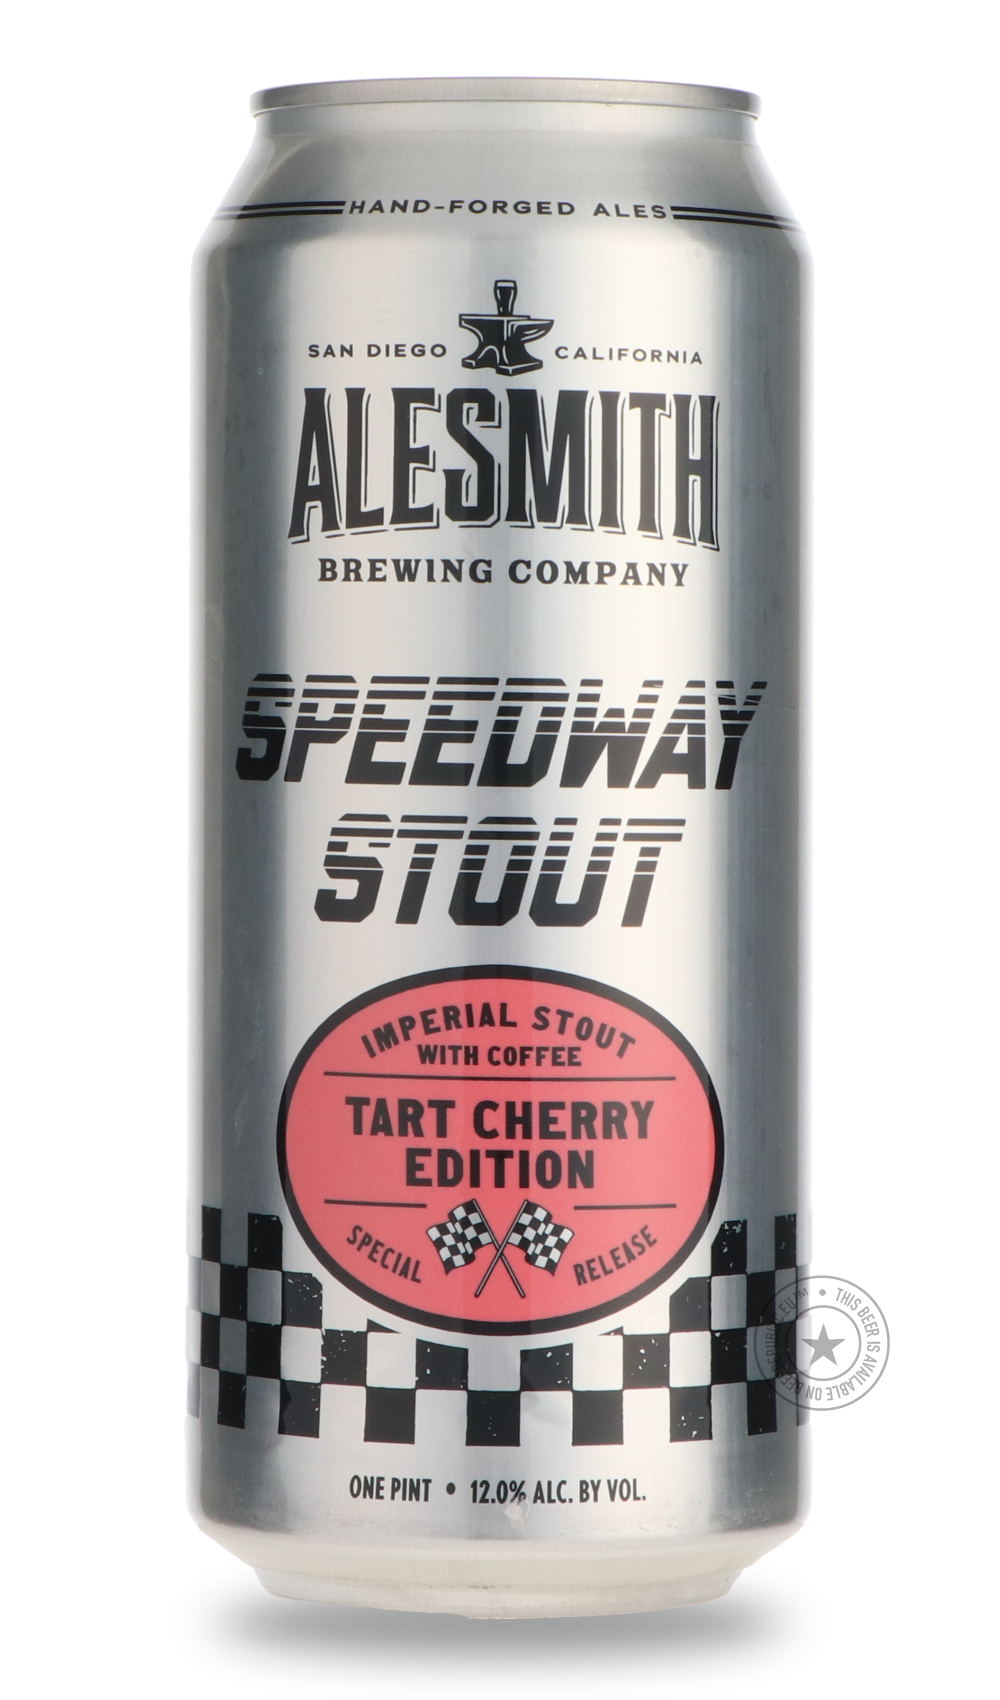 -AleSmith- Speedway Stout Tart Cherry-Stout & Porter- Only @ Beer Republic - The best online beer store for American & Canadian craft beer - Buy beer online from the USA and Canada - Bier online kopen - Amerikaans bier kopen - Craft beer store - Craft beer kopen - Amerikanisch bier kaufen - Bier online kaufen - Acheter biere online - IPA - Stout - Porter - New England IPA - Hazy IPA - Imperial Stout - Barrel Aged - Barrel Aged Imperial Stout - Brown - Dark beer - Blond - Blonde - Pilsner - Lager - Wheat - W